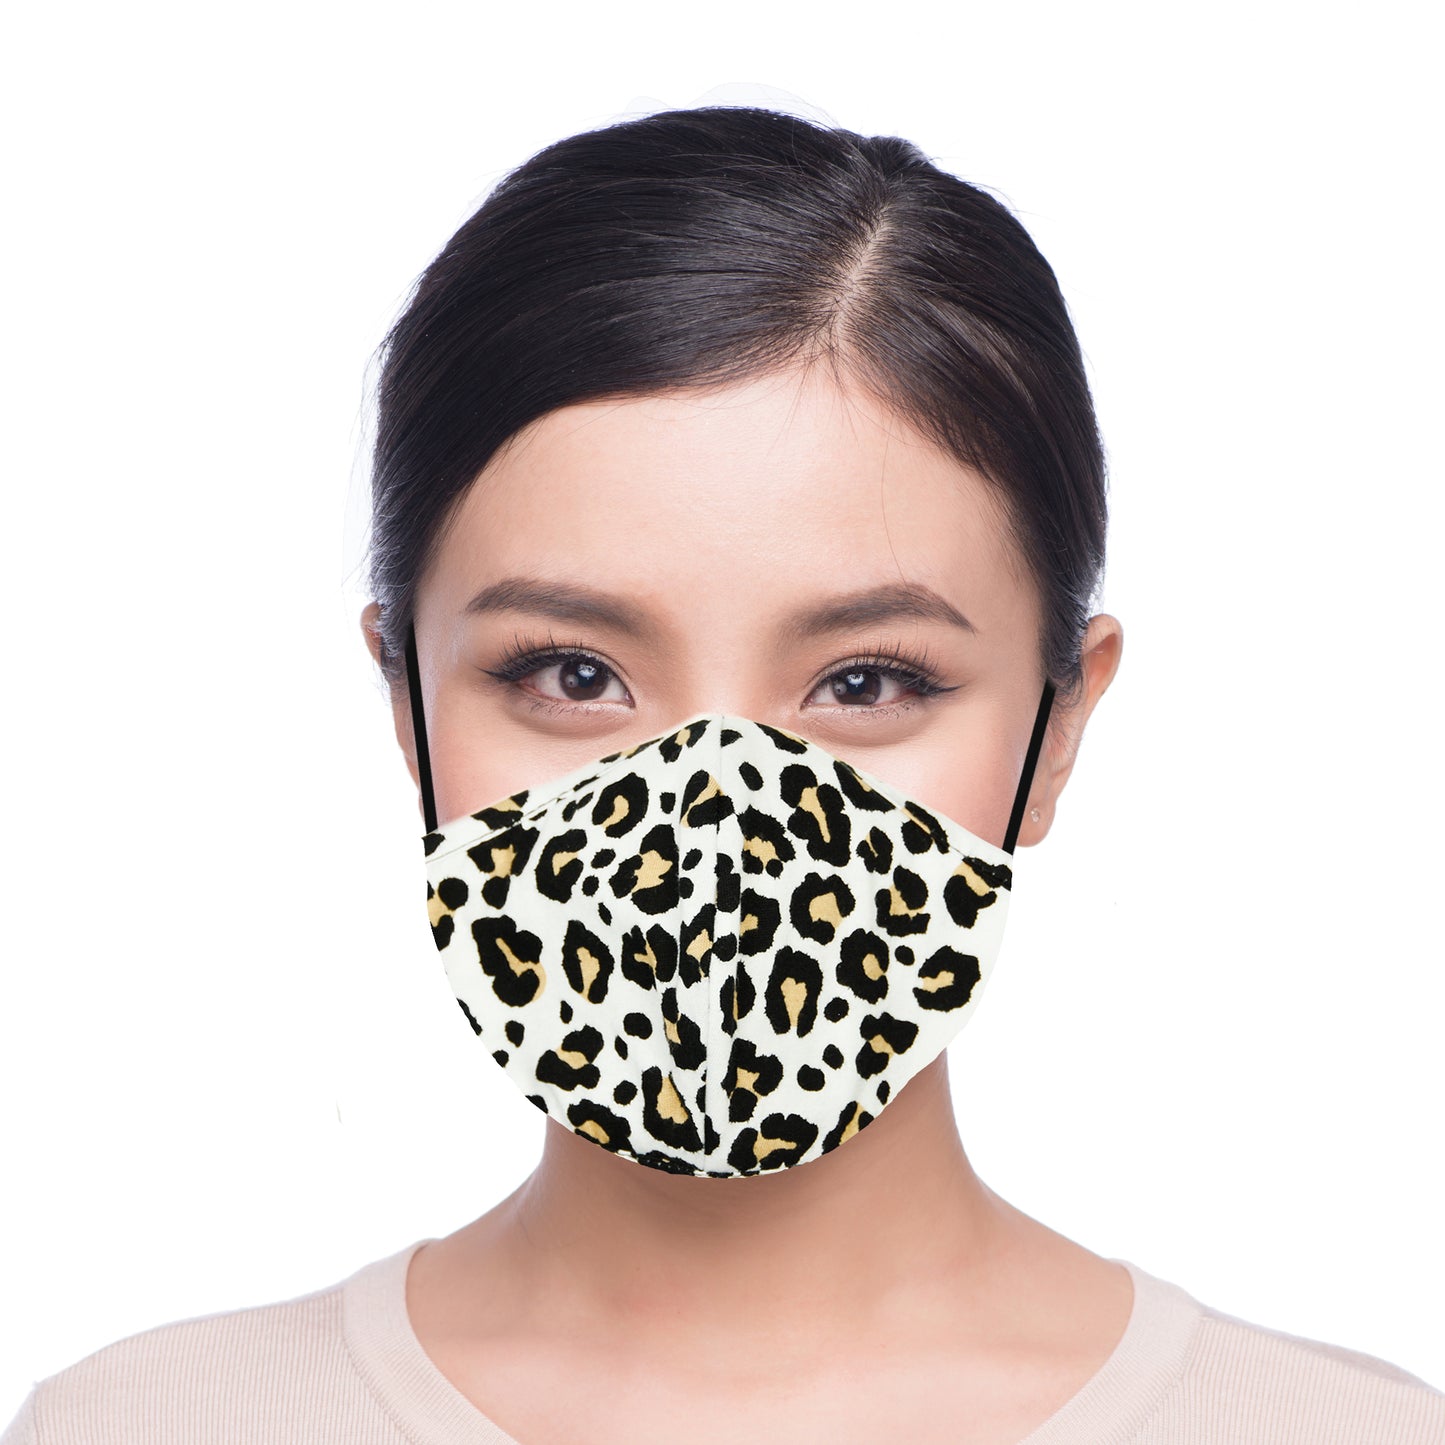 Dalix Leopard Print Cloth Face Masks Reuseable Washable Made in USA